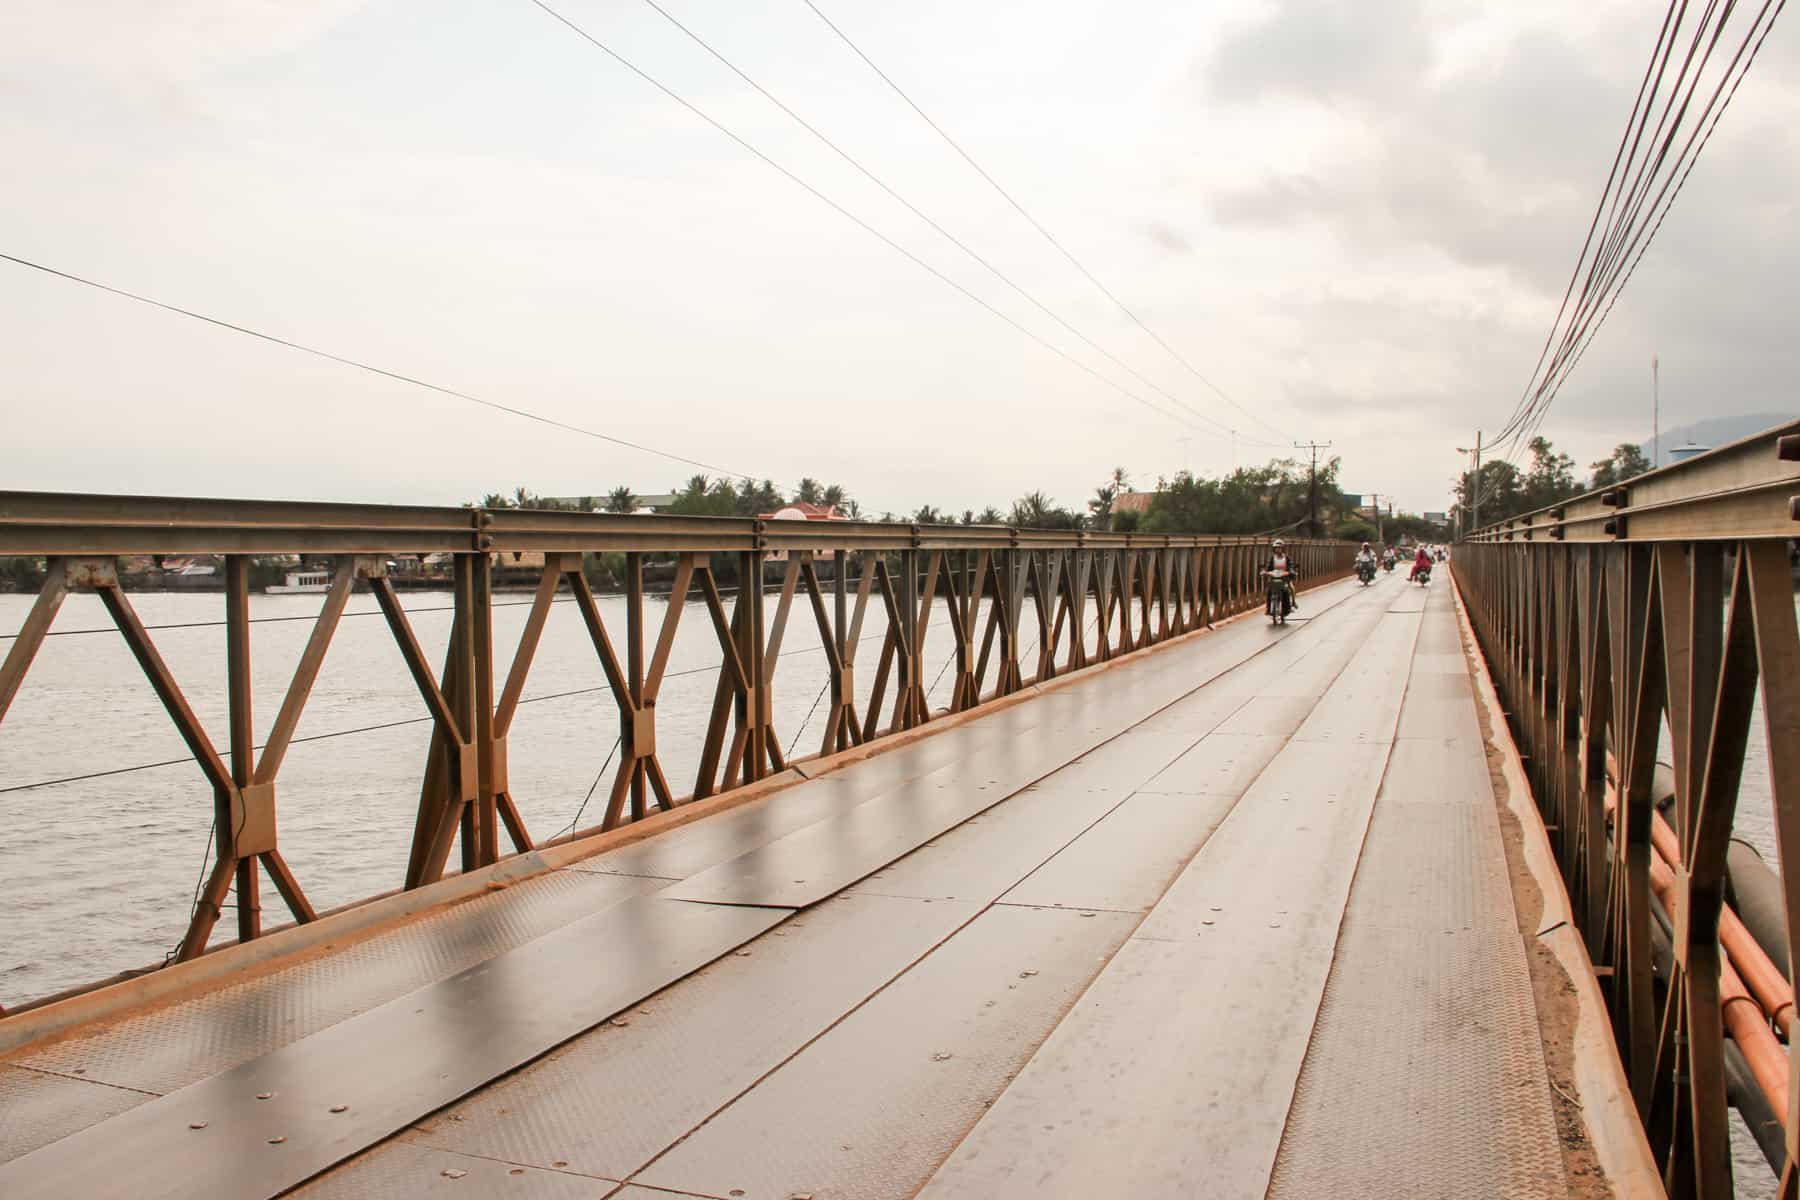 Motorbike approach from a distance on a Iron clad traffic bridge in Kampot that connects two sides of the river below. 